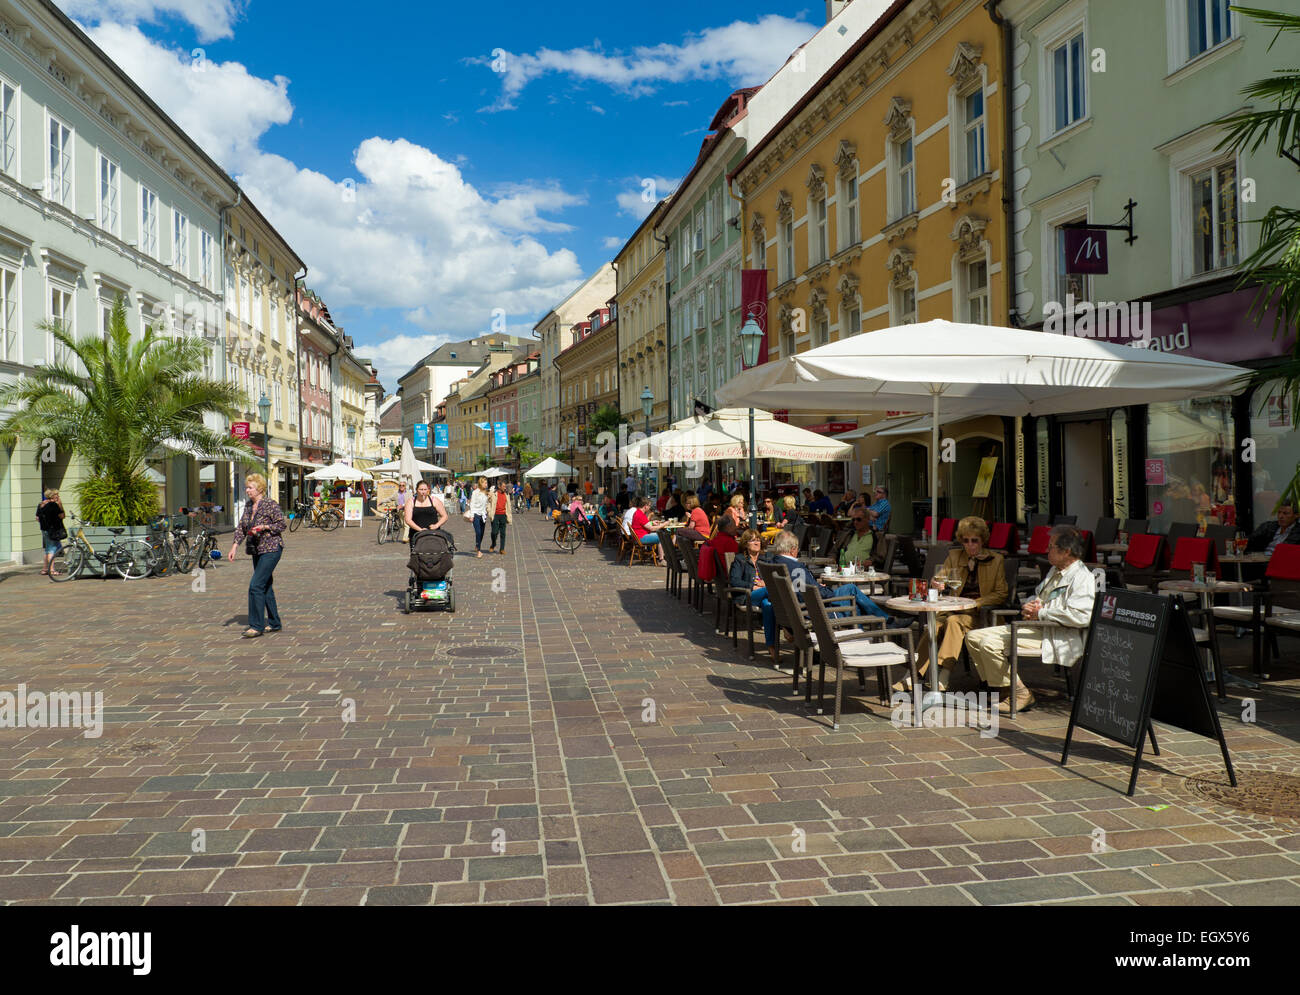 shopping street of klagenfurt, austria.  It is the capital of the federal state of Carinthia in Austria. Stock Photo